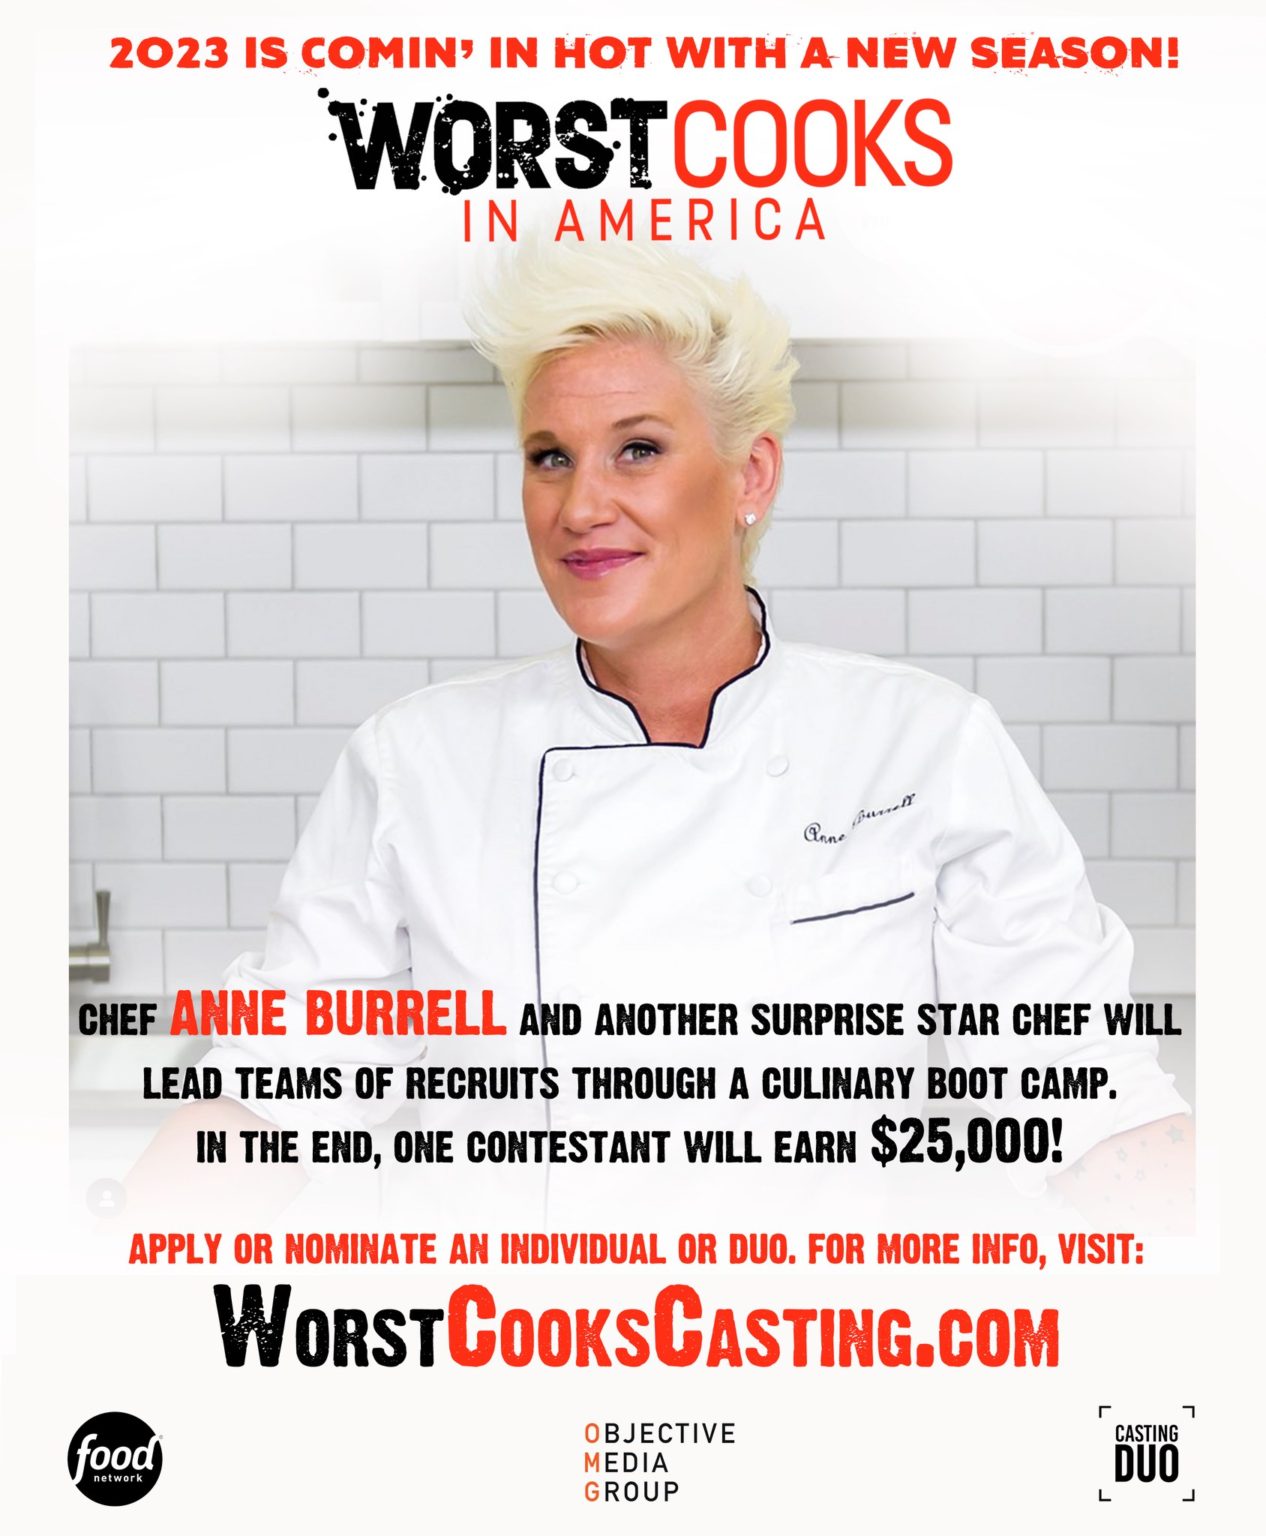 2023 Casting Call for Food Network’s “Worst Cooks in America